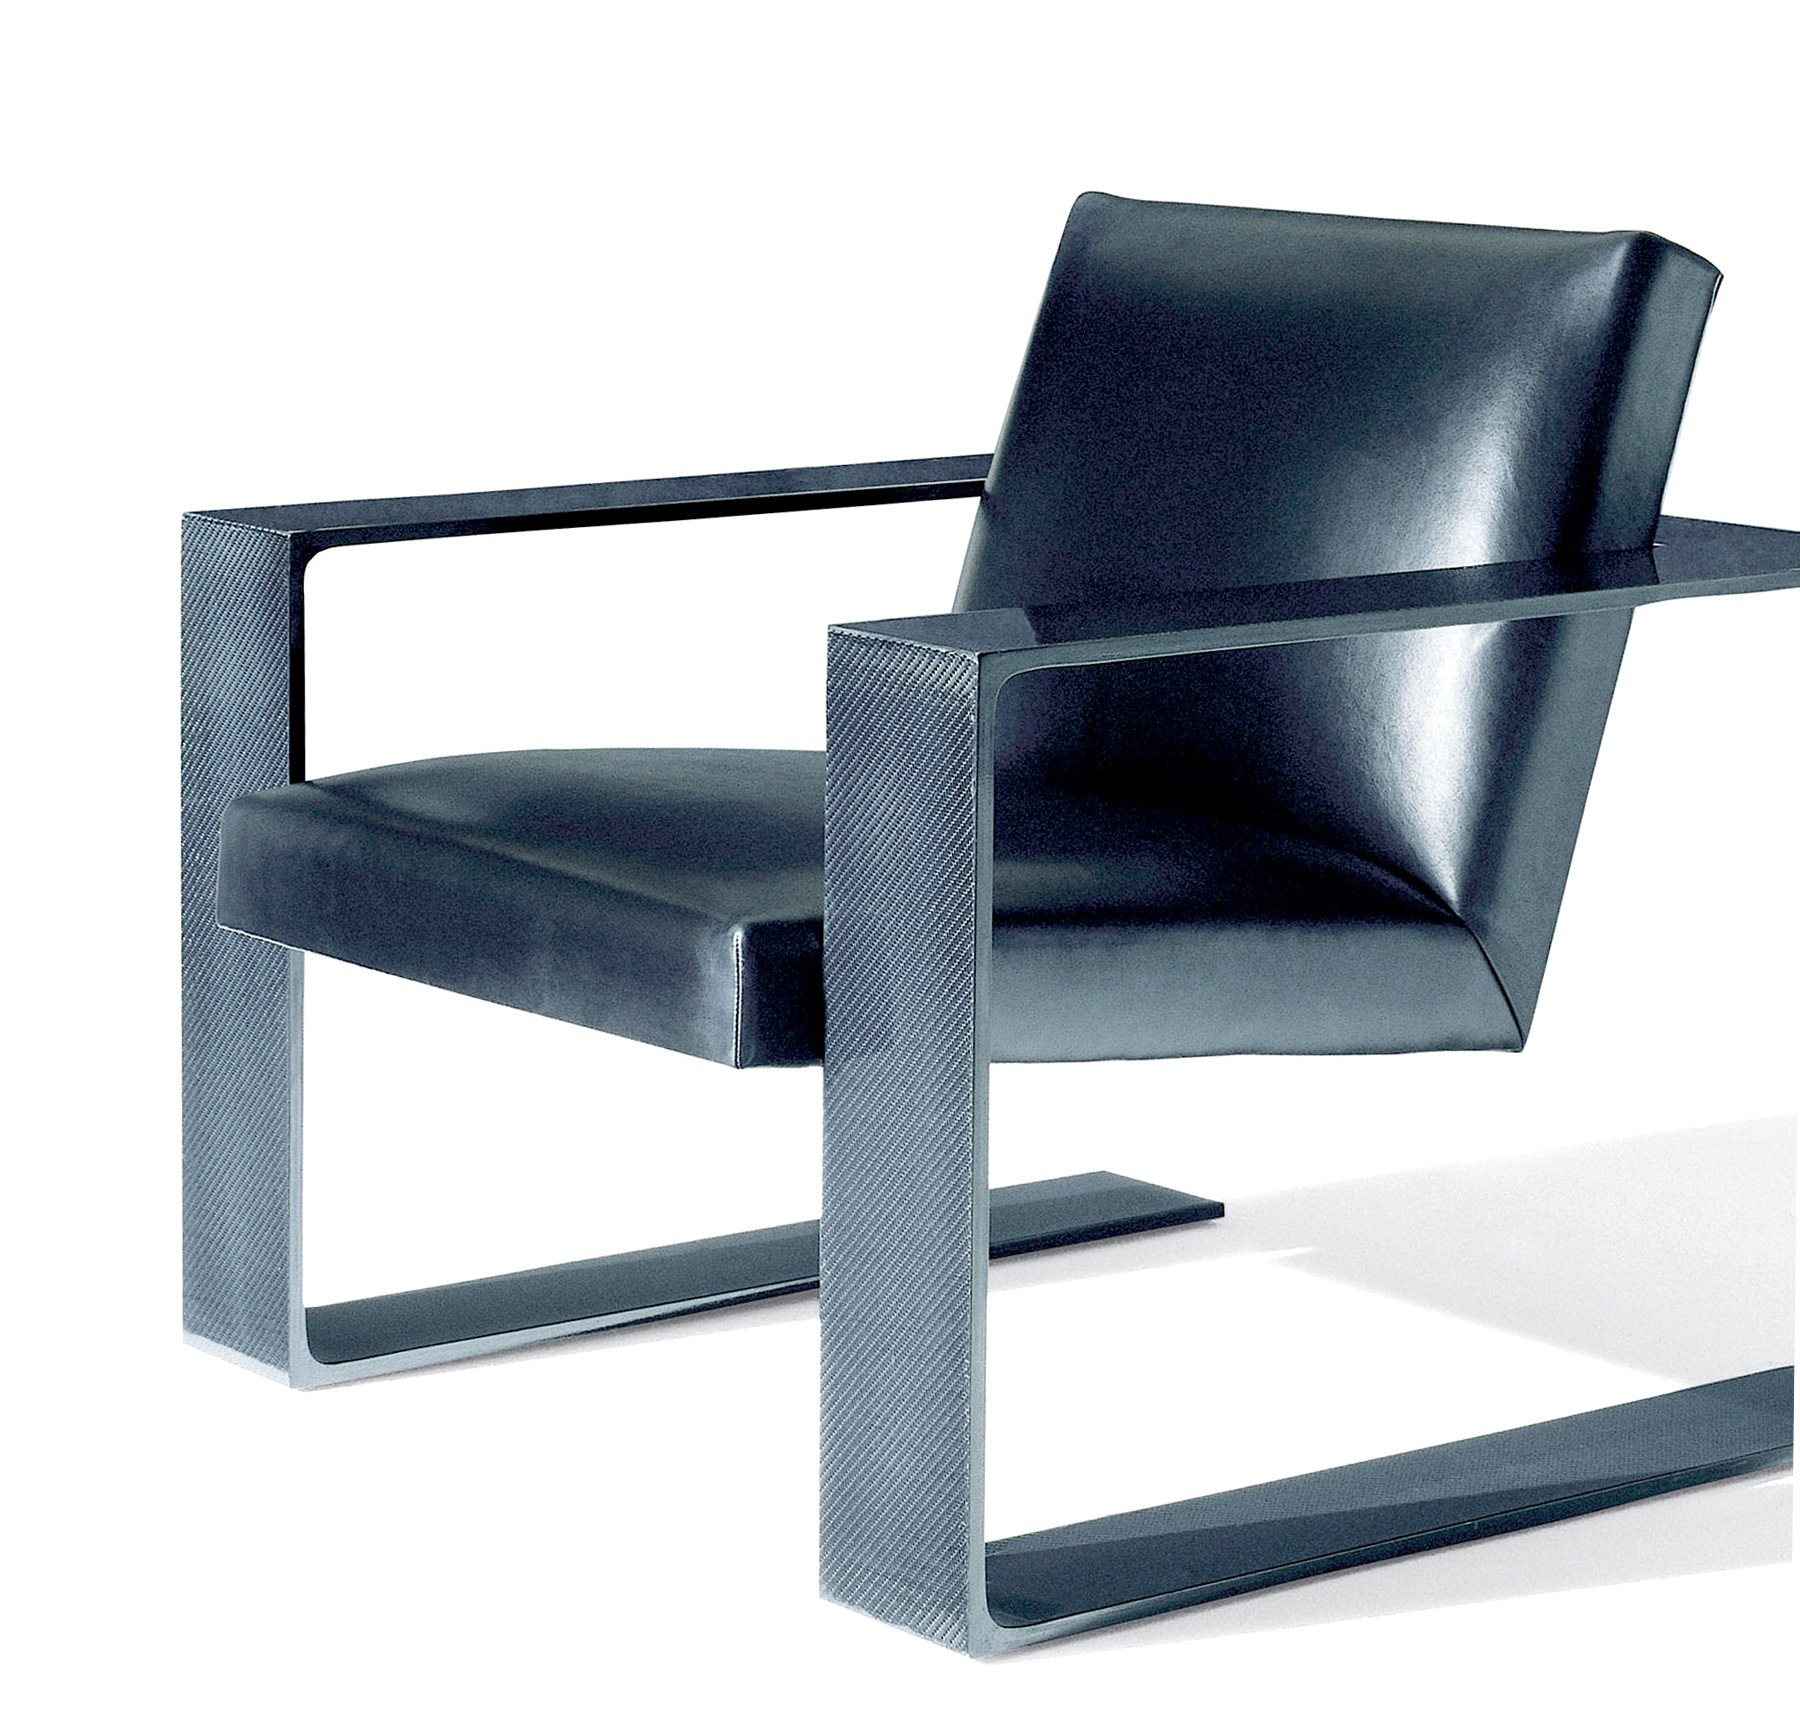  Formed from the same high-tech material that shapes Formula One race cars, the sleek RL-CF1 lounge chair boasts 54 layers of hand-laid tissue carbon